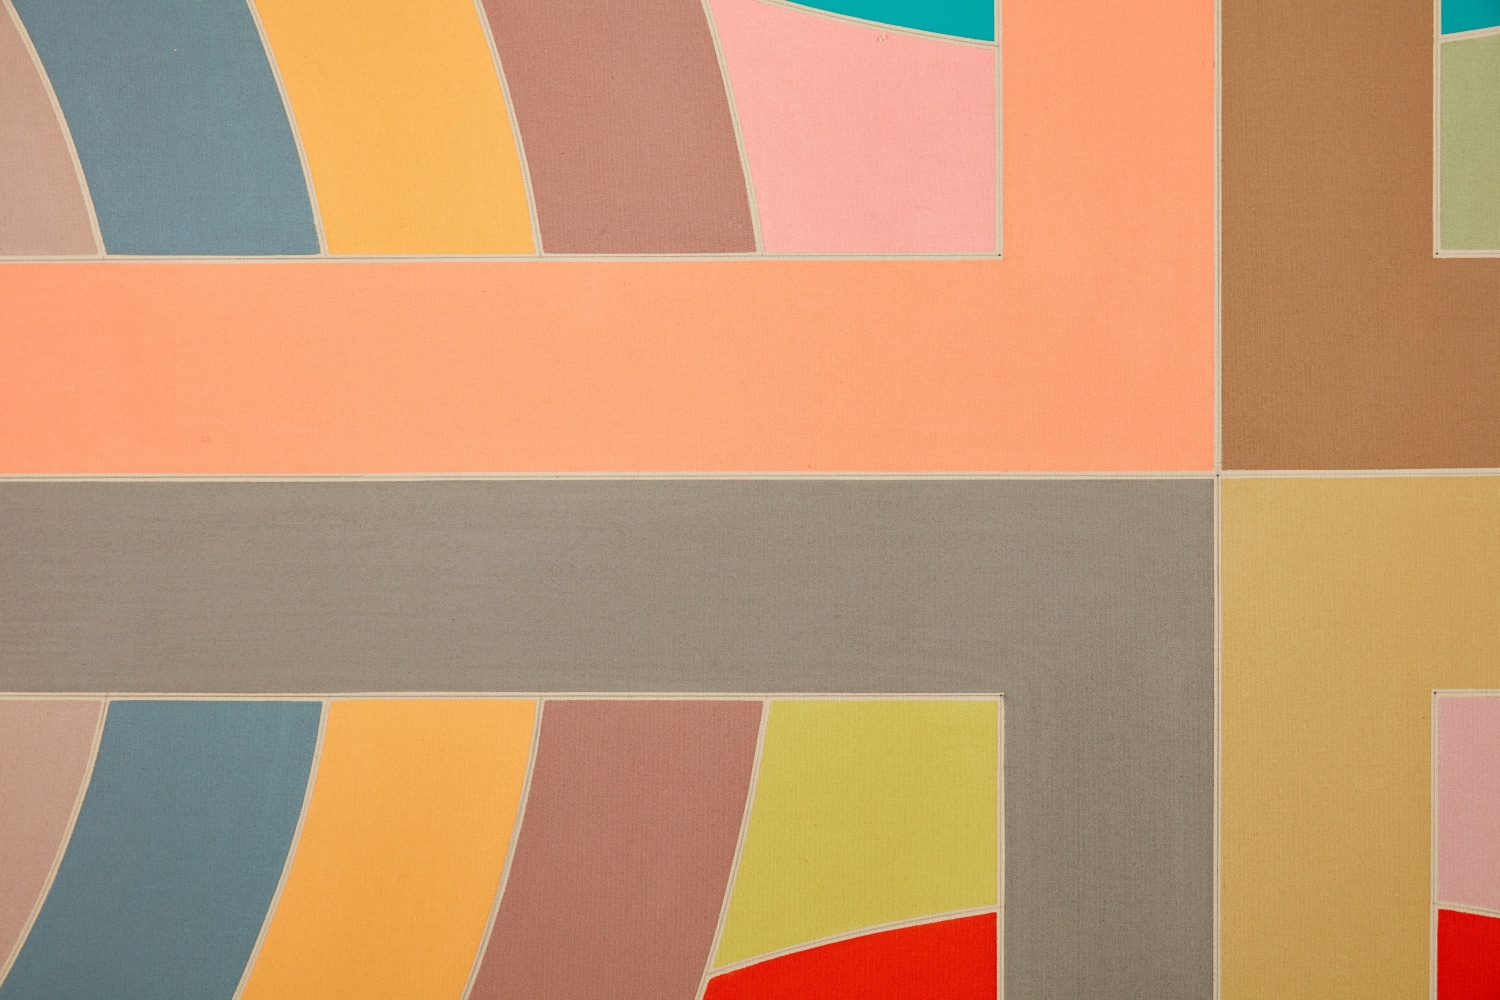 Frank Stella
Hiraqla Variation II, 1968 (detail)
Magna on canvas
120 x 240 inches
(304.8 x 609.6 cm)
&amp;copy; 2024 Frank Stella / Artists Rights Society (ARS), New York. Photo: Jason Wyche. Private Collection.